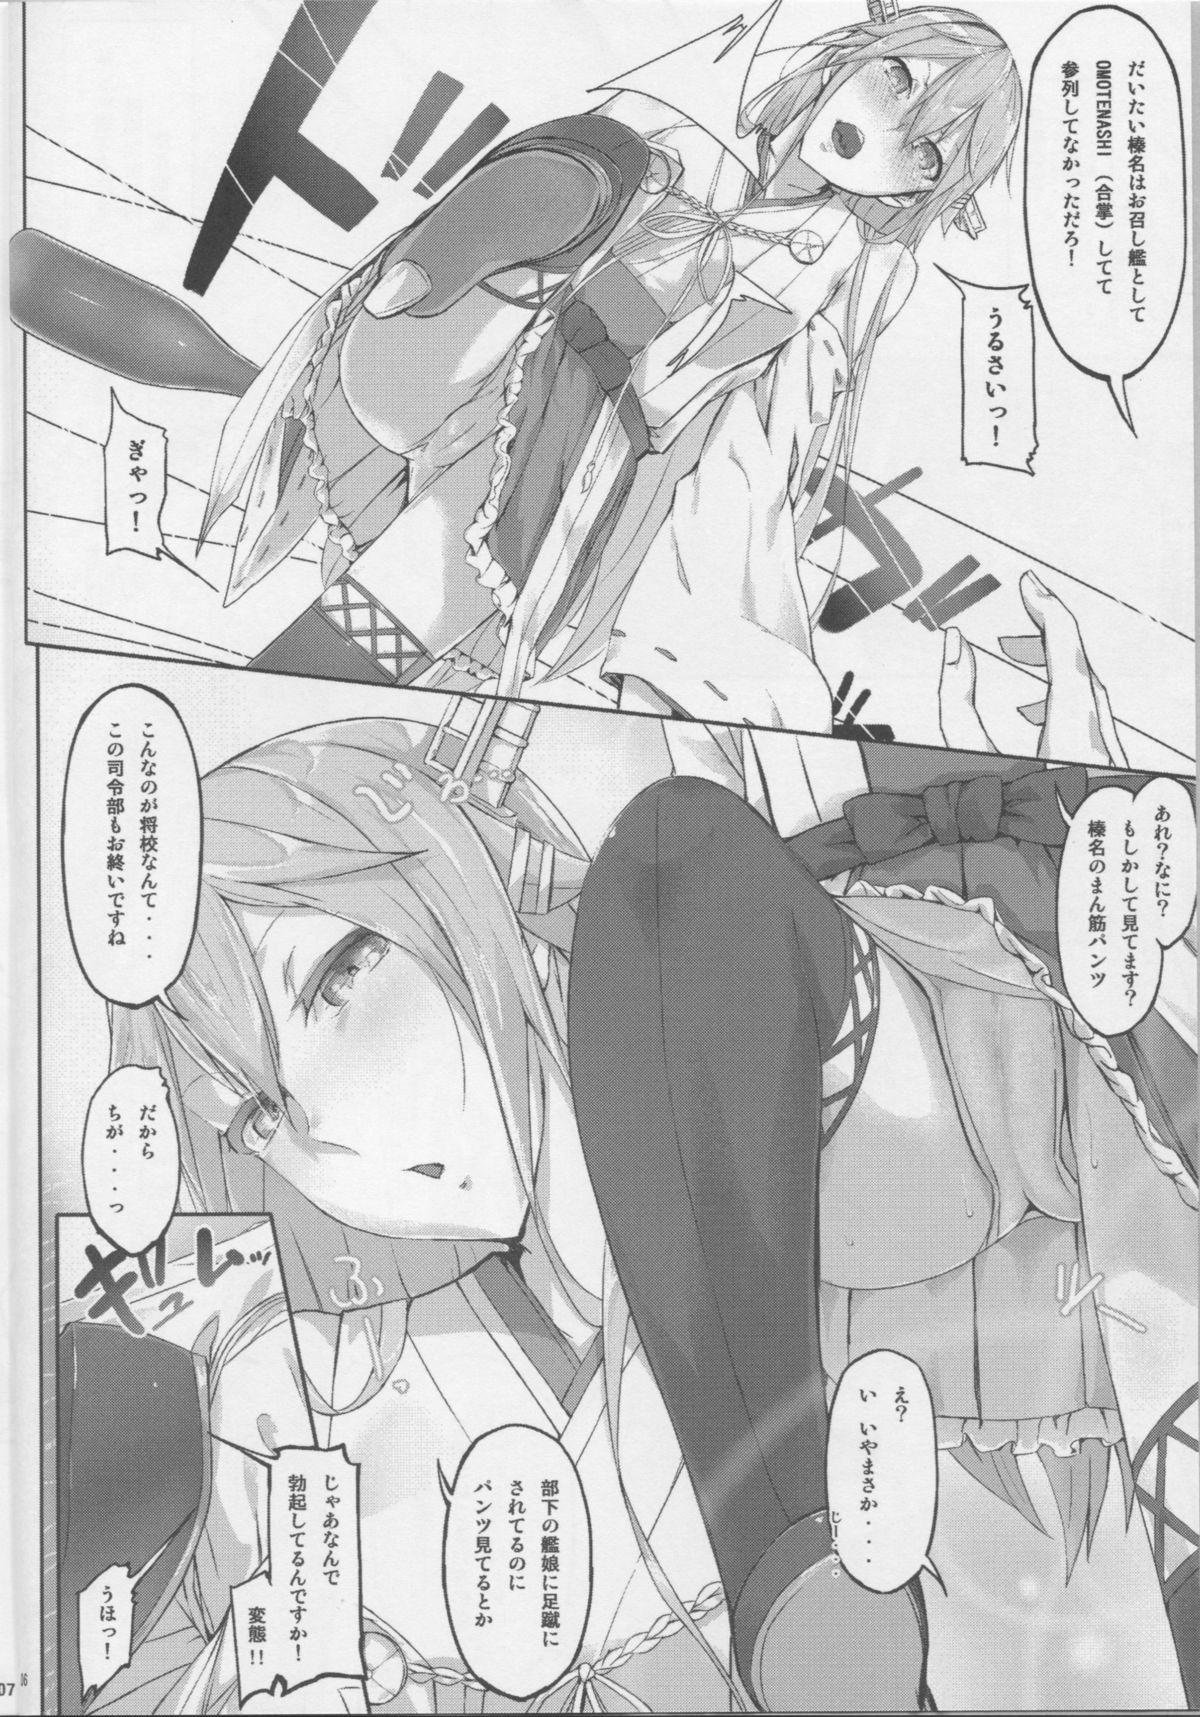 Grosso Fleet Girls Pack vol. 1 - Kantai collection Passion - Page 5